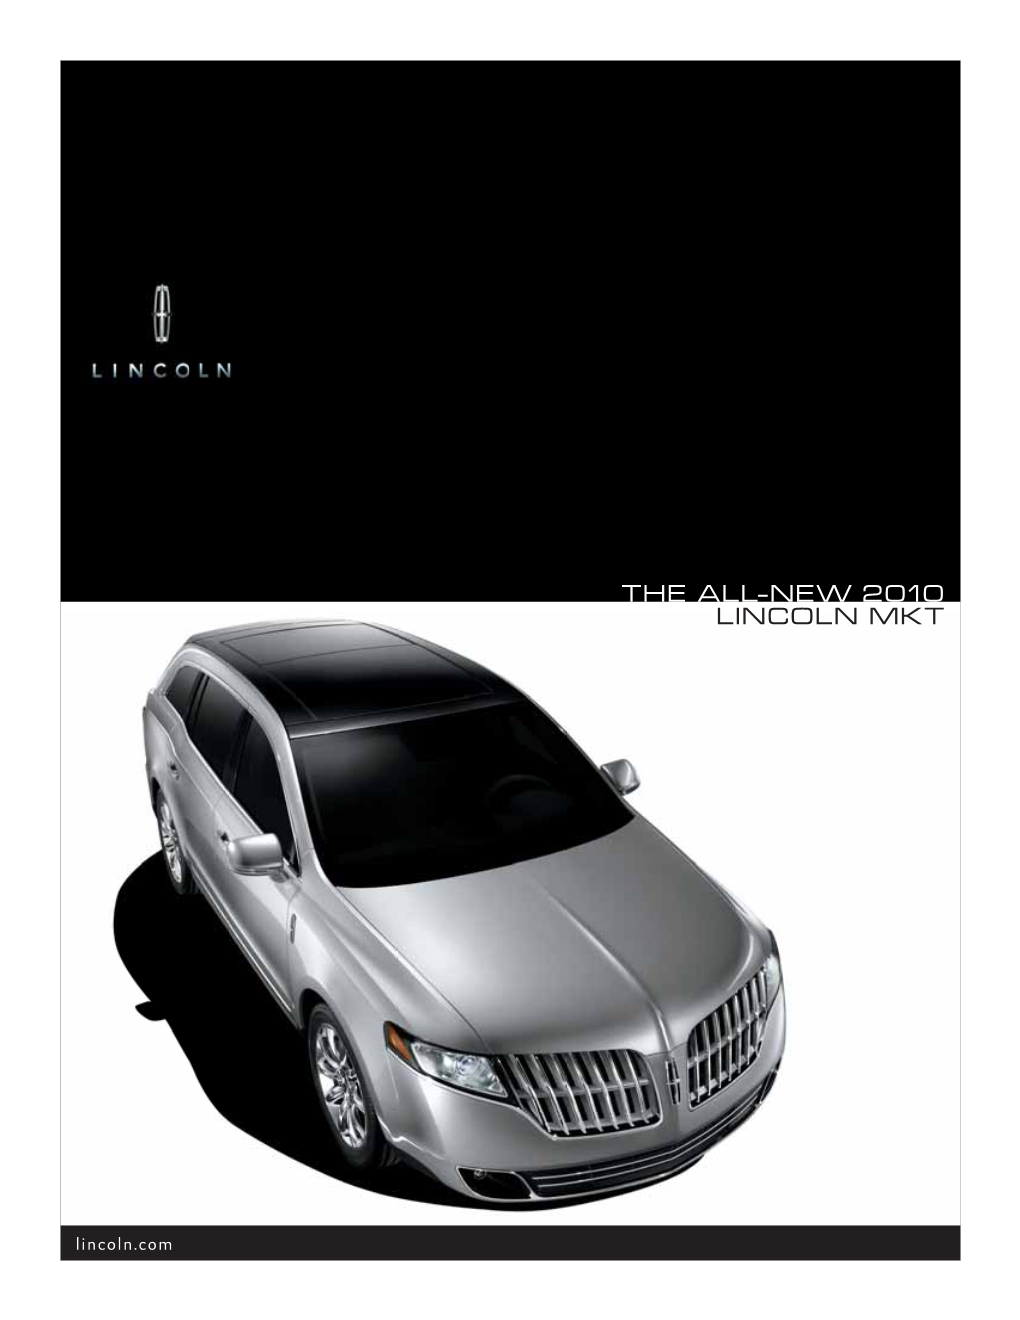 The All-New 2010 Lincoln Mkt